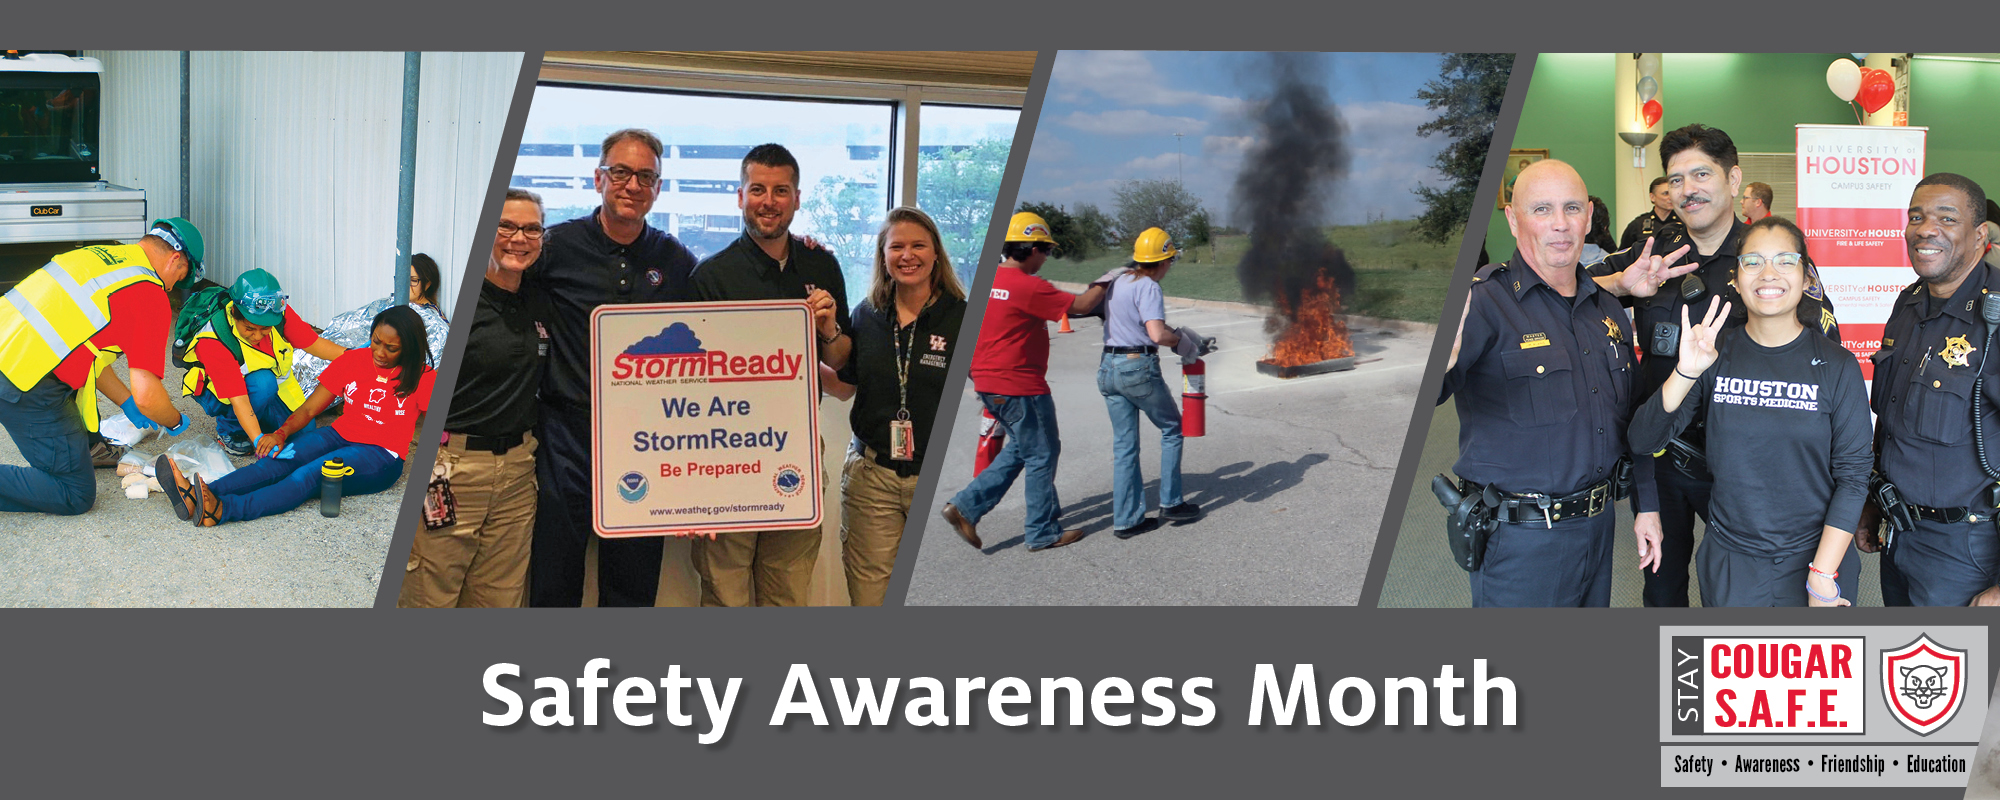 Campus Safety Awareness Month